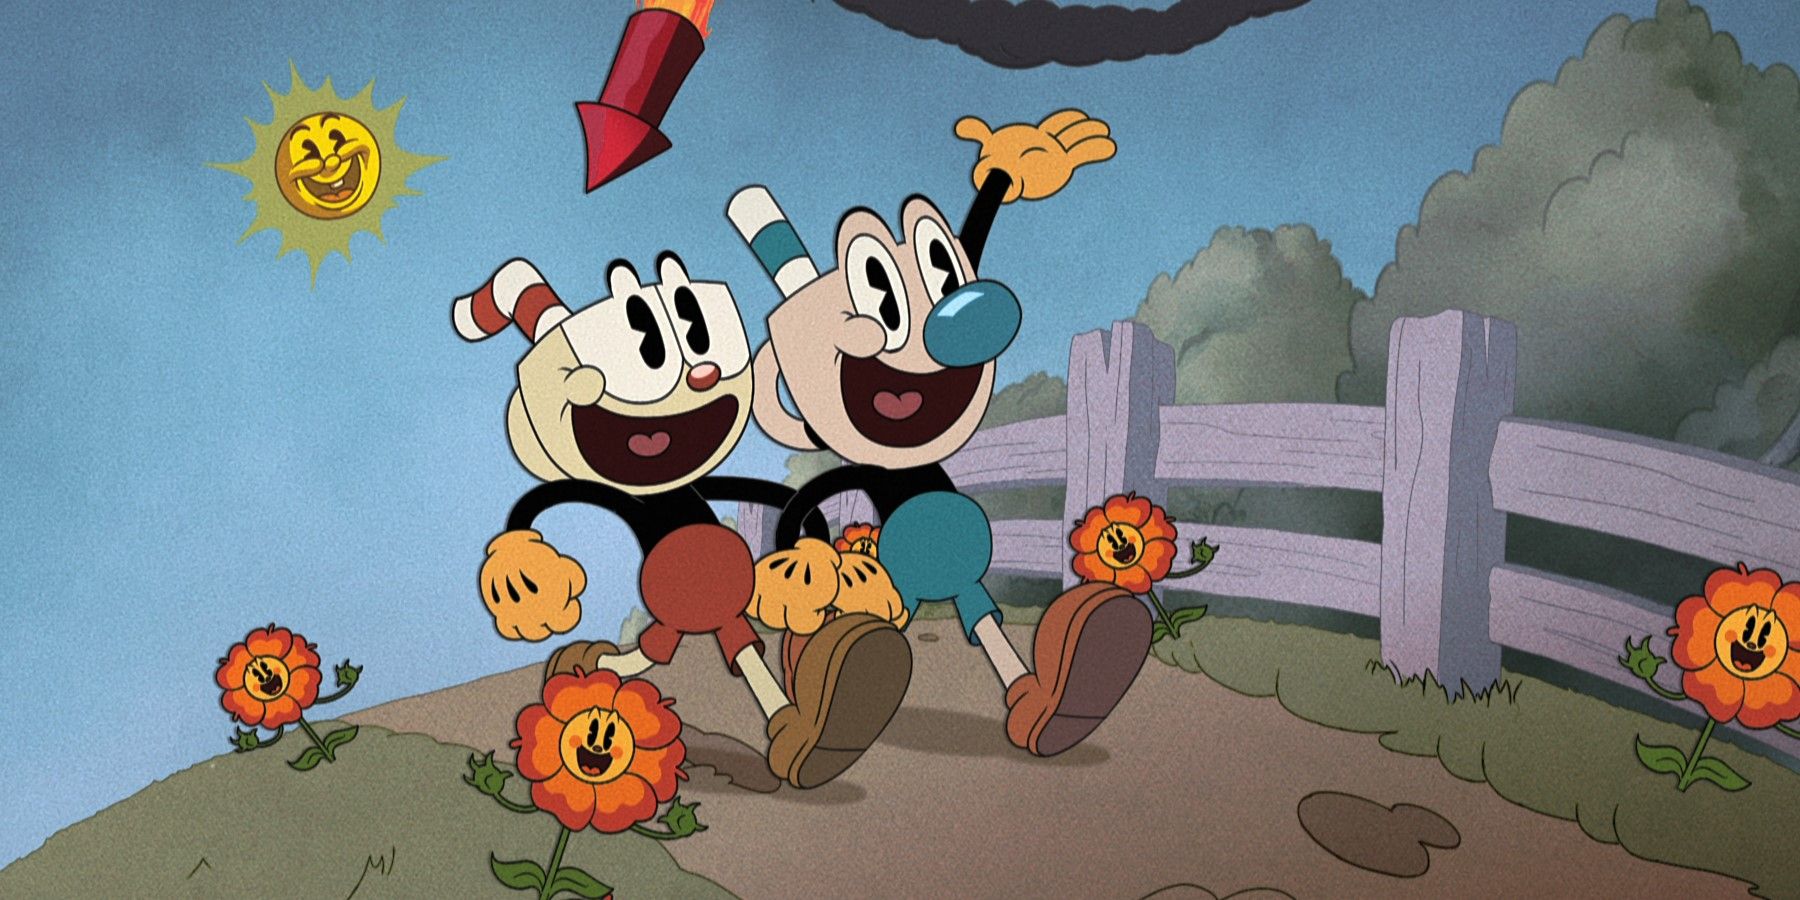 Cuphead Show Trailer Reveals Release Date for the Animated